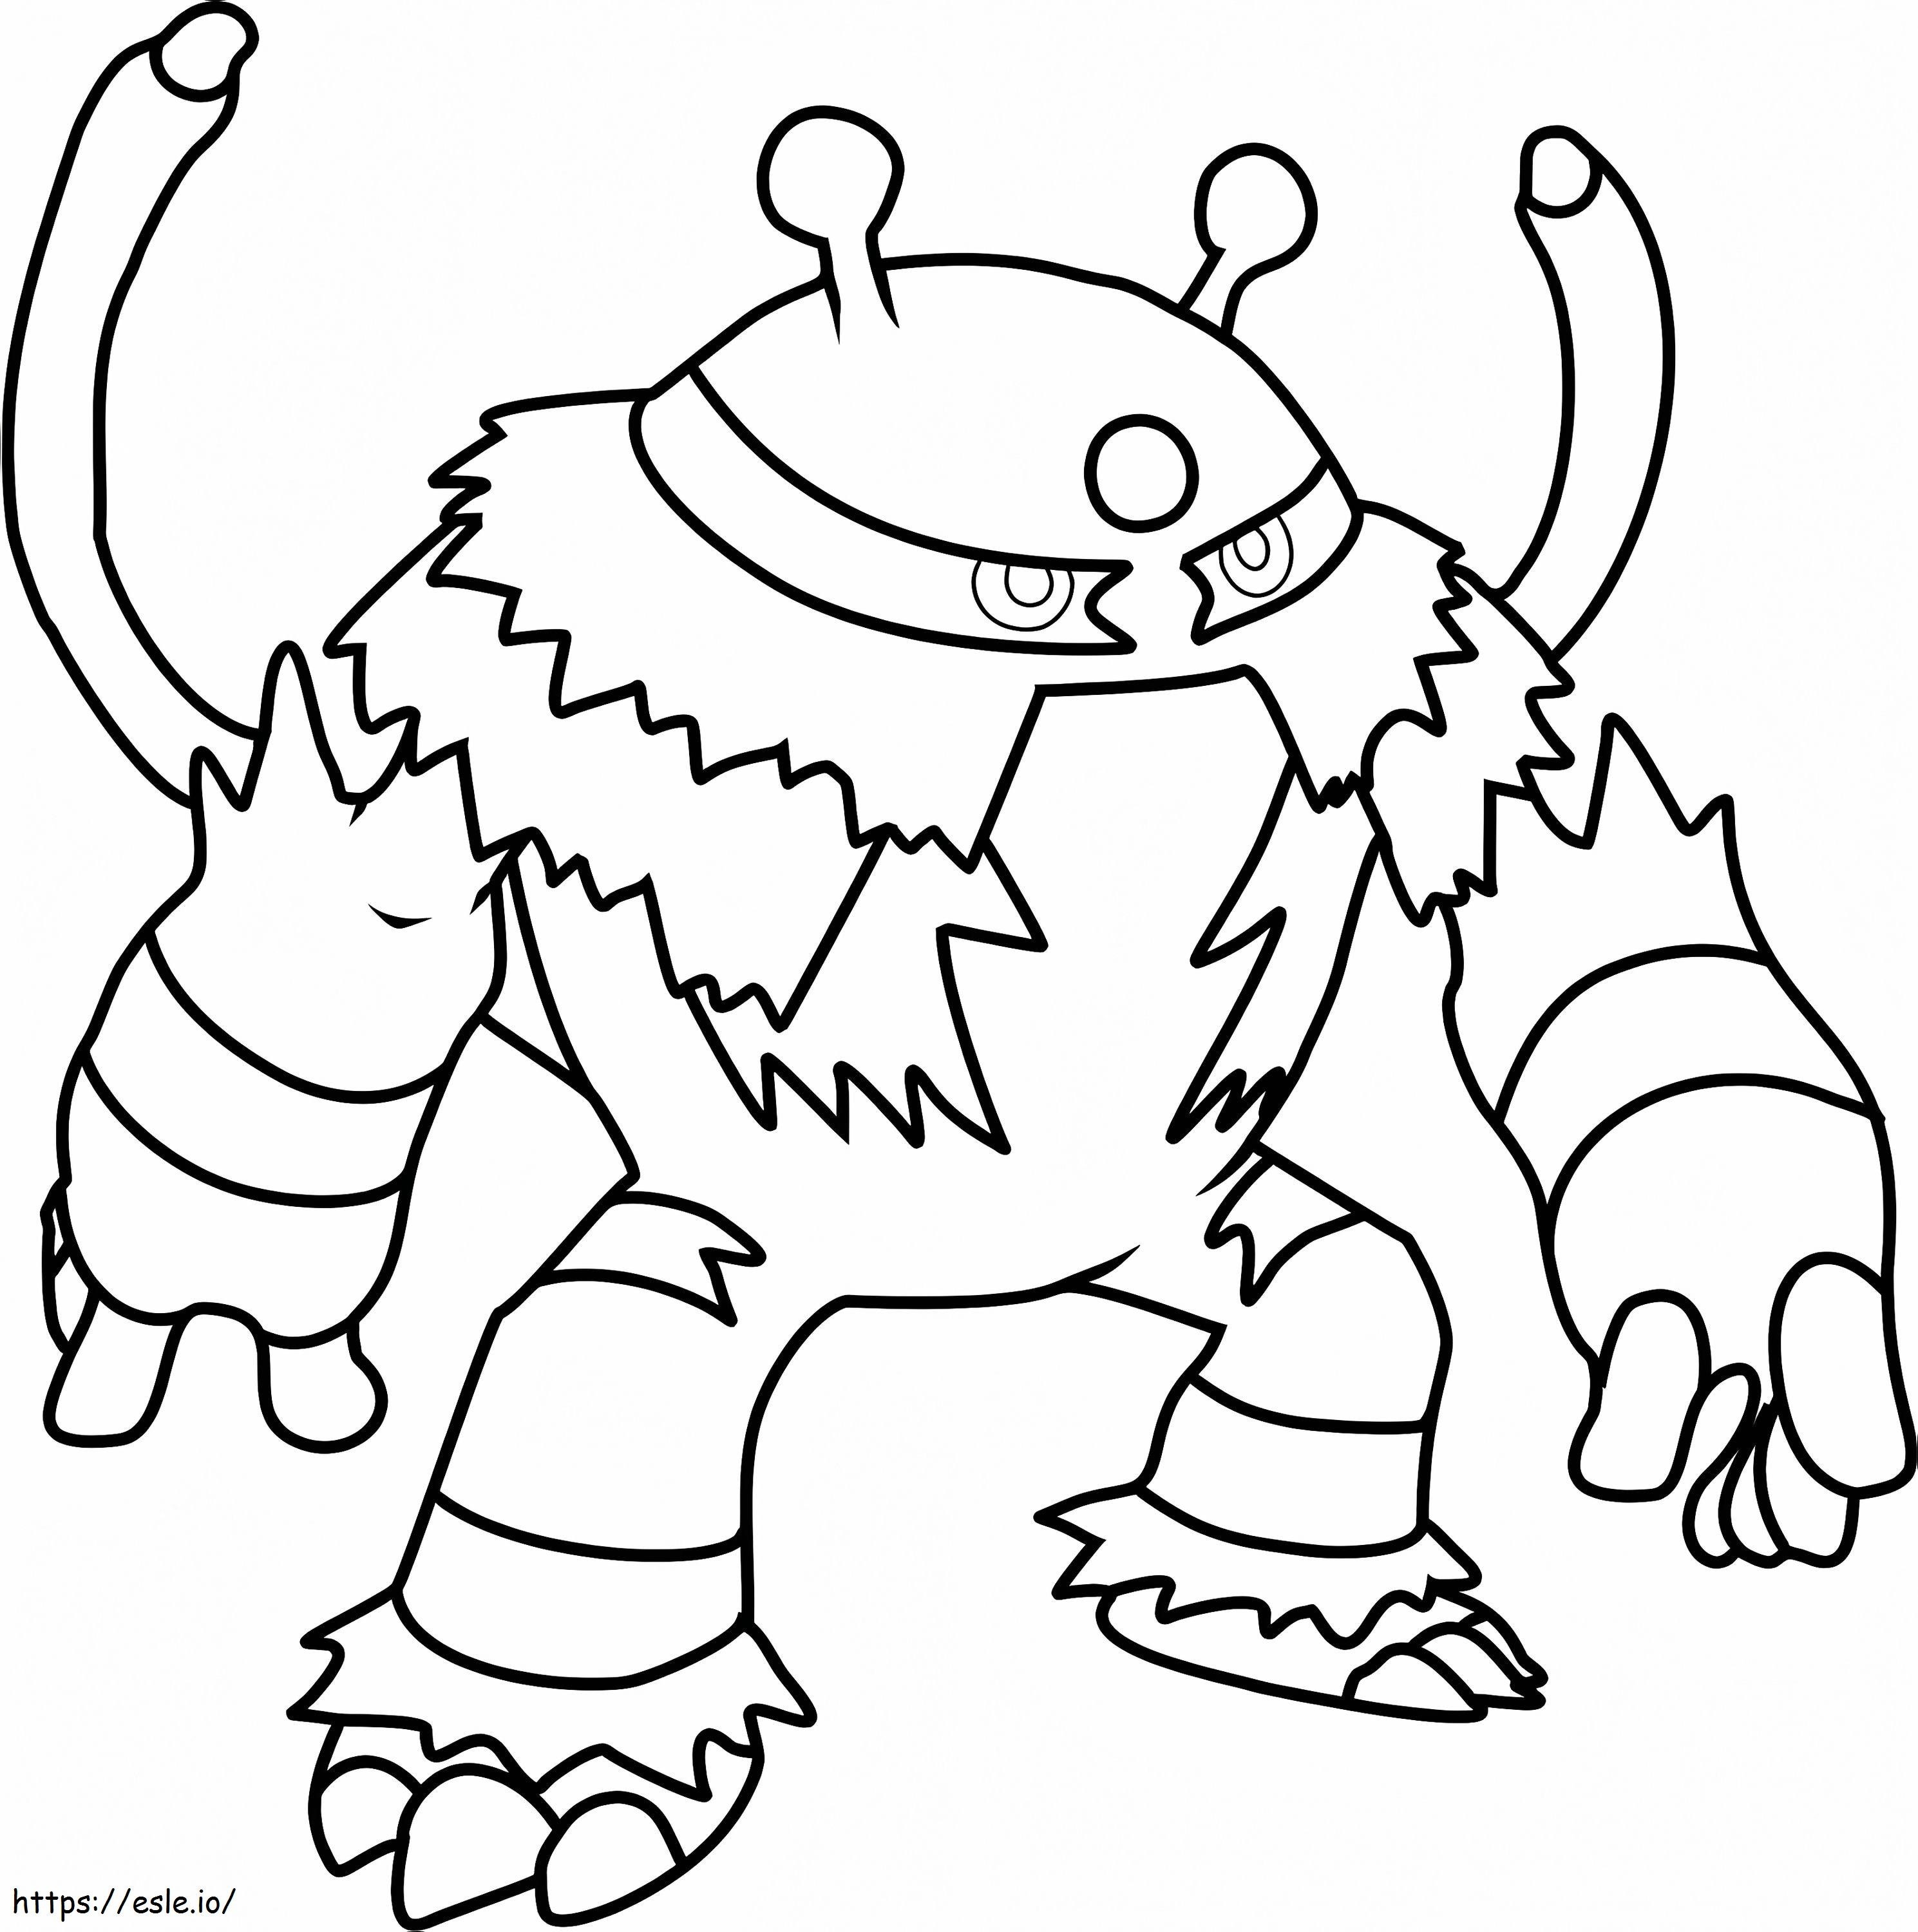 electivire coloring page to print pokemon